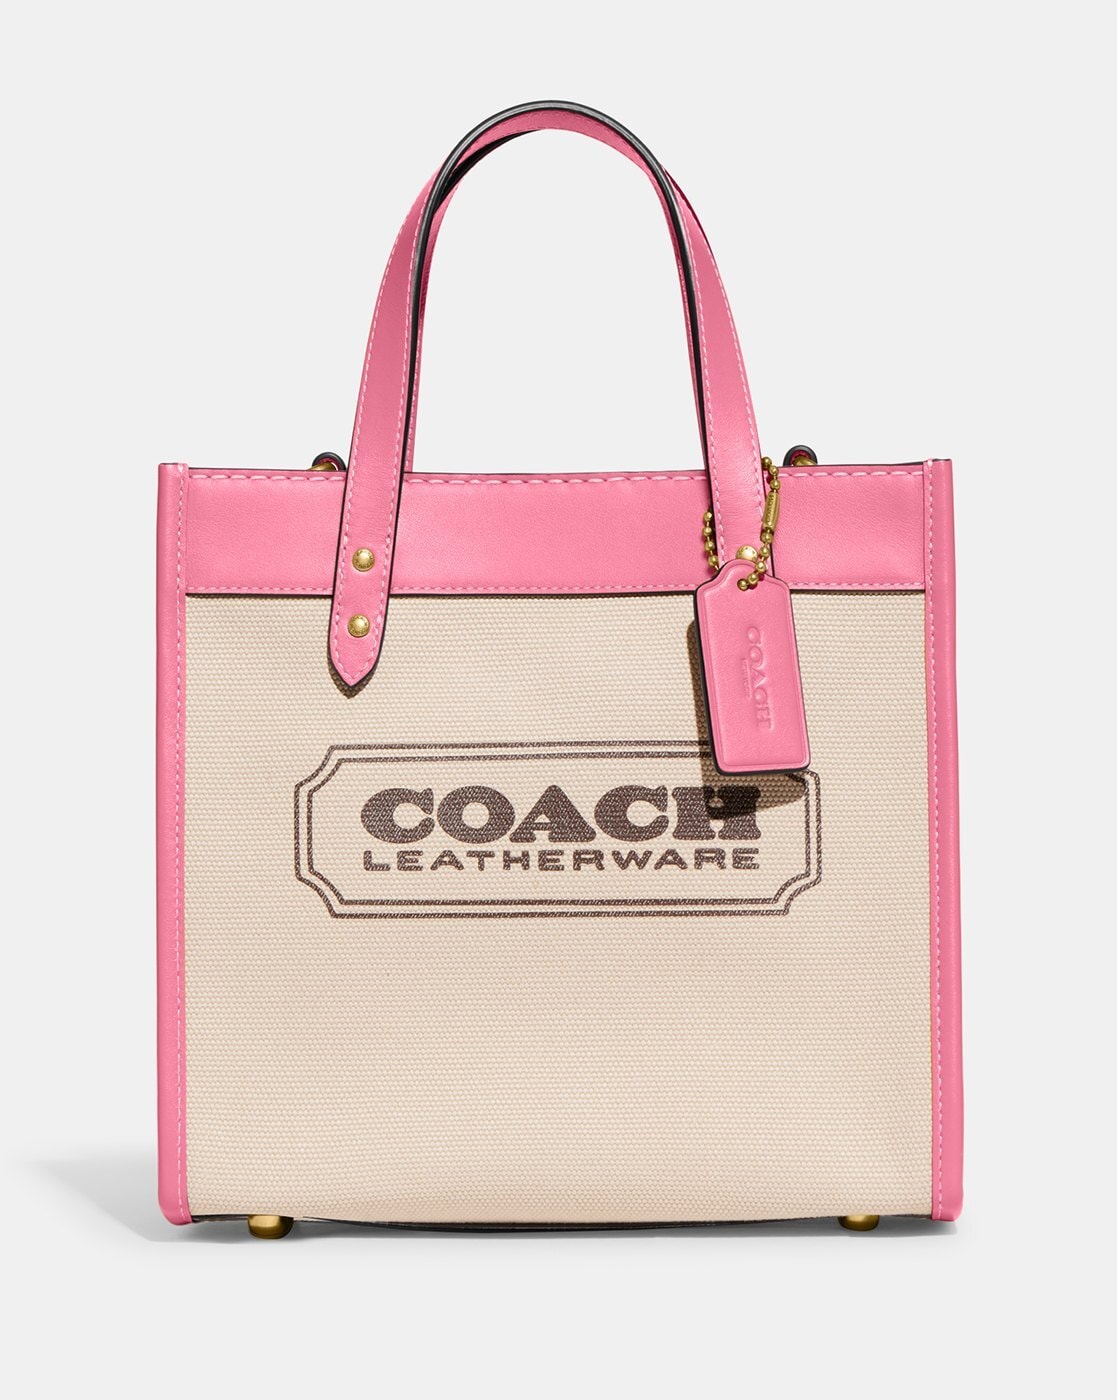 Coach's Famous Bags Are Up to 73% Off In This Secret Presidents Day Sale